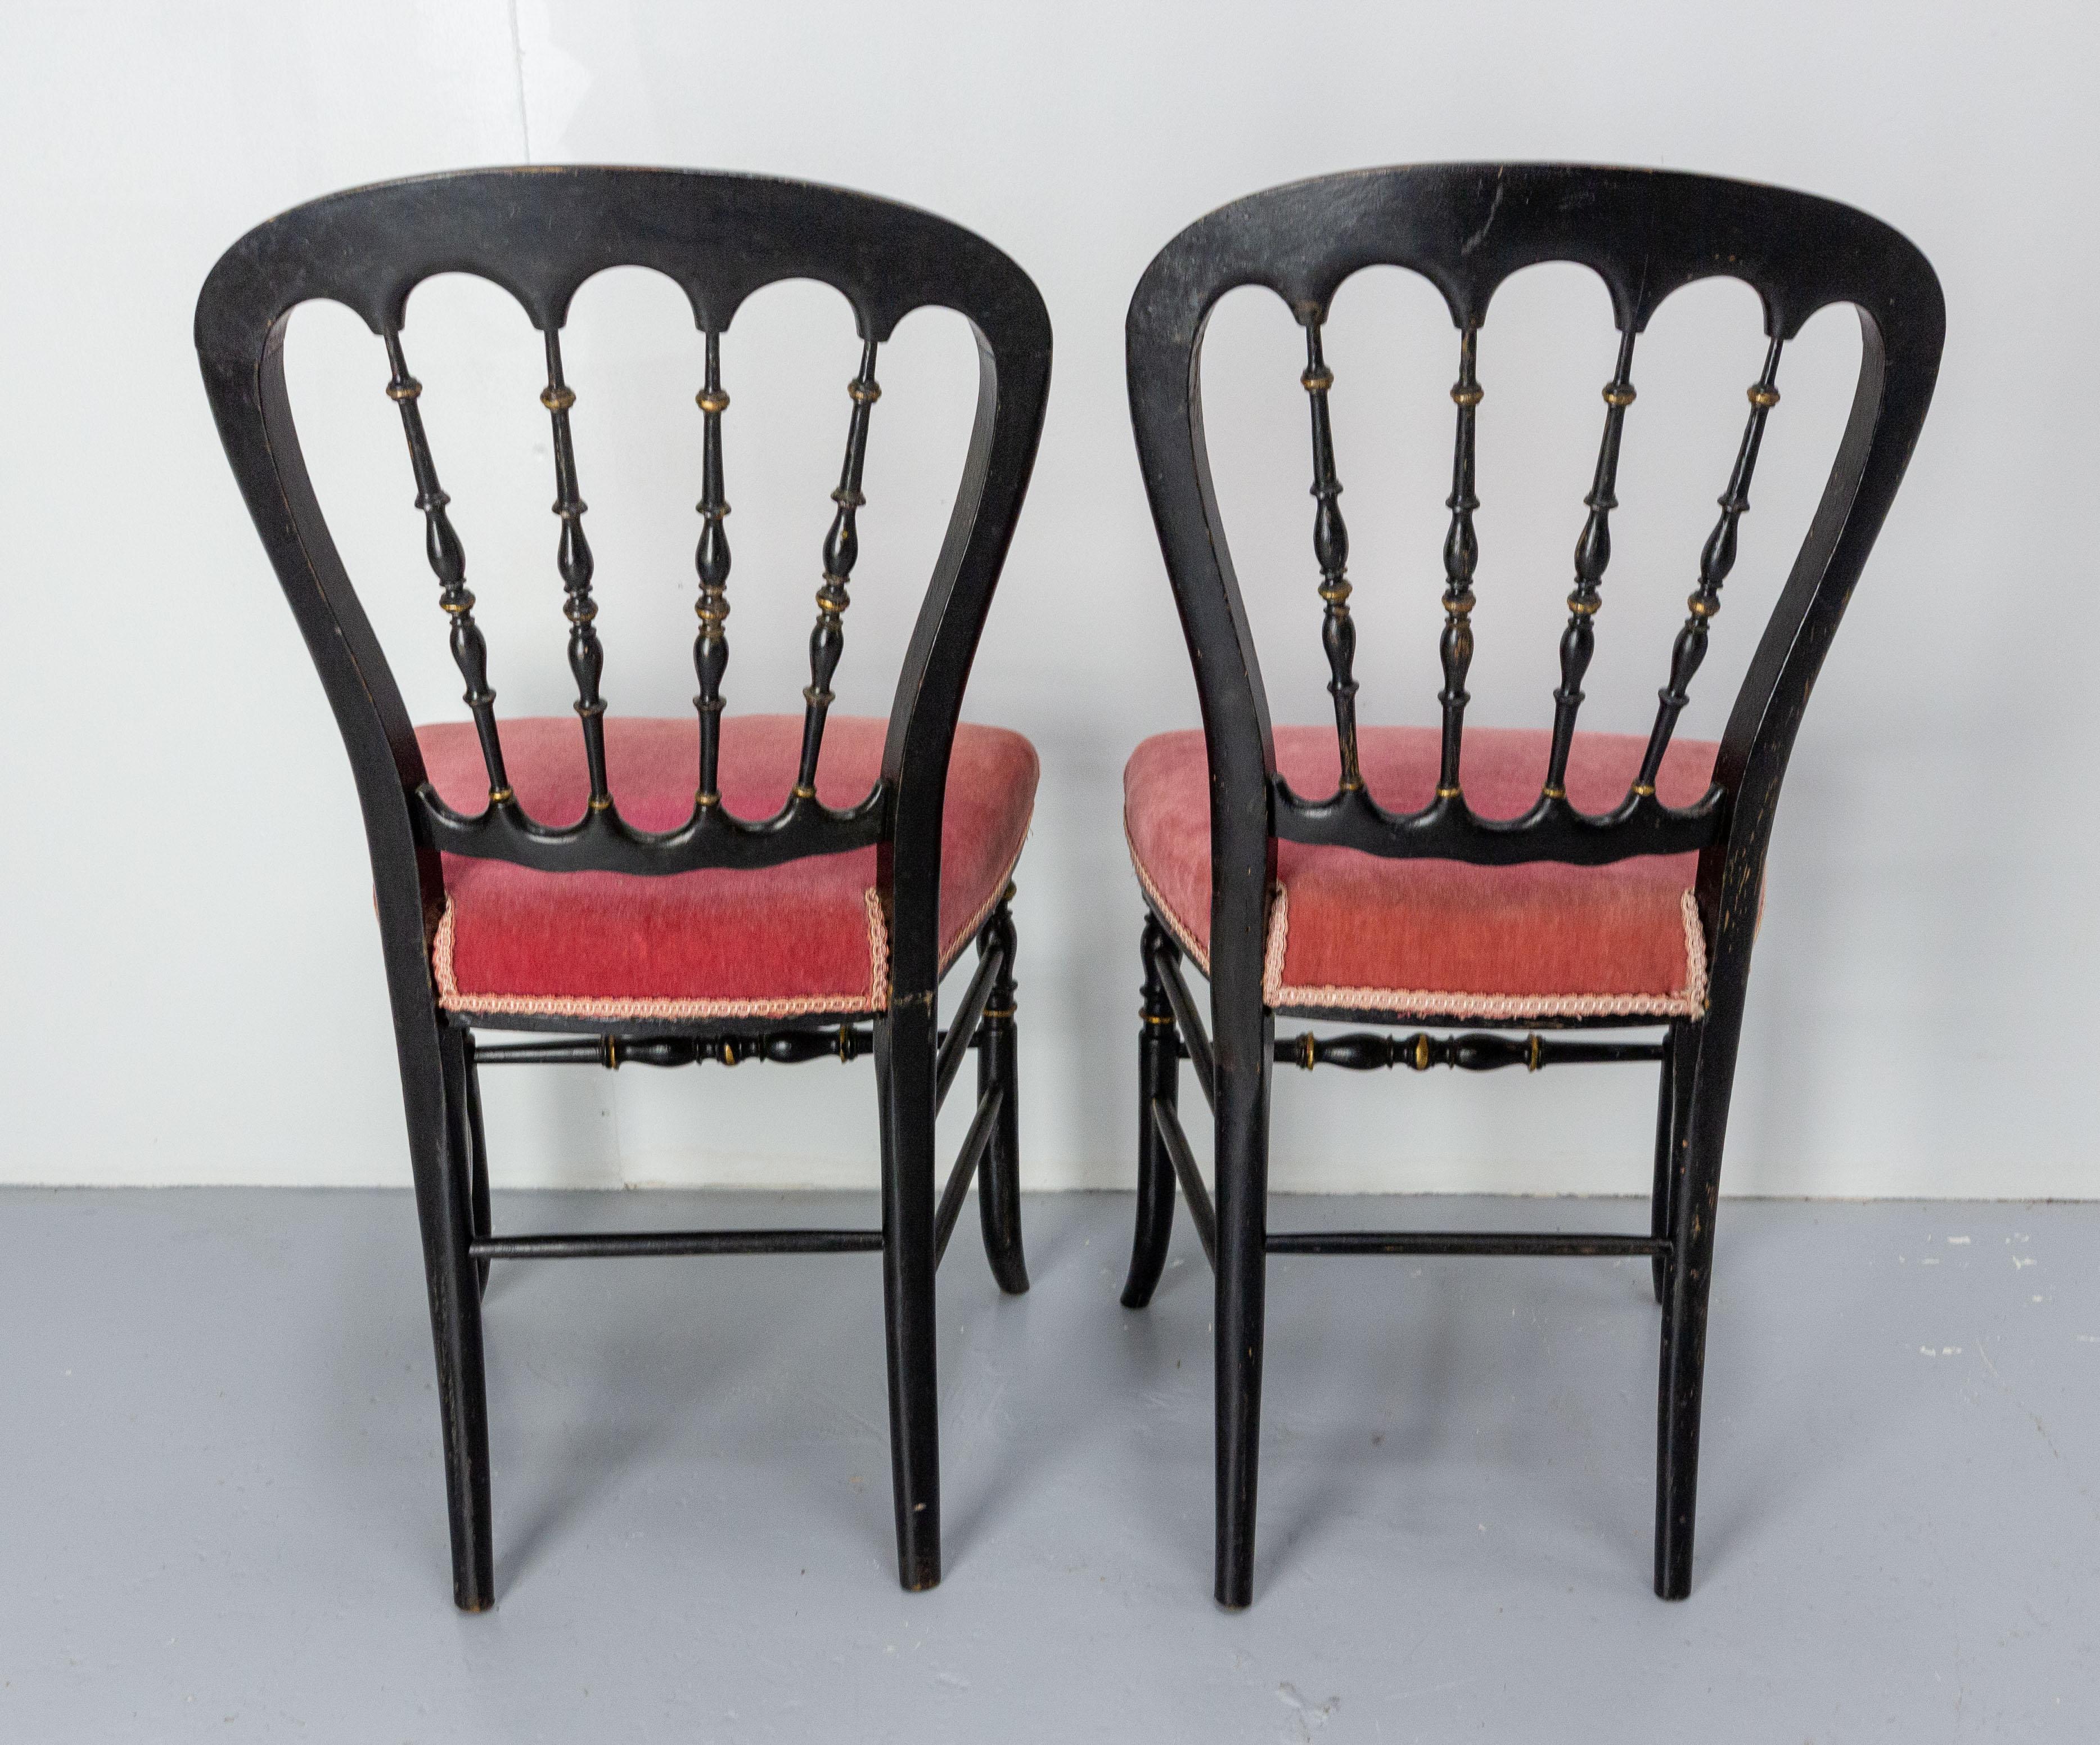 Pair of Napoleon III Chairs Fabric and Painted Wood, French, Late 19th Century For Sale 2